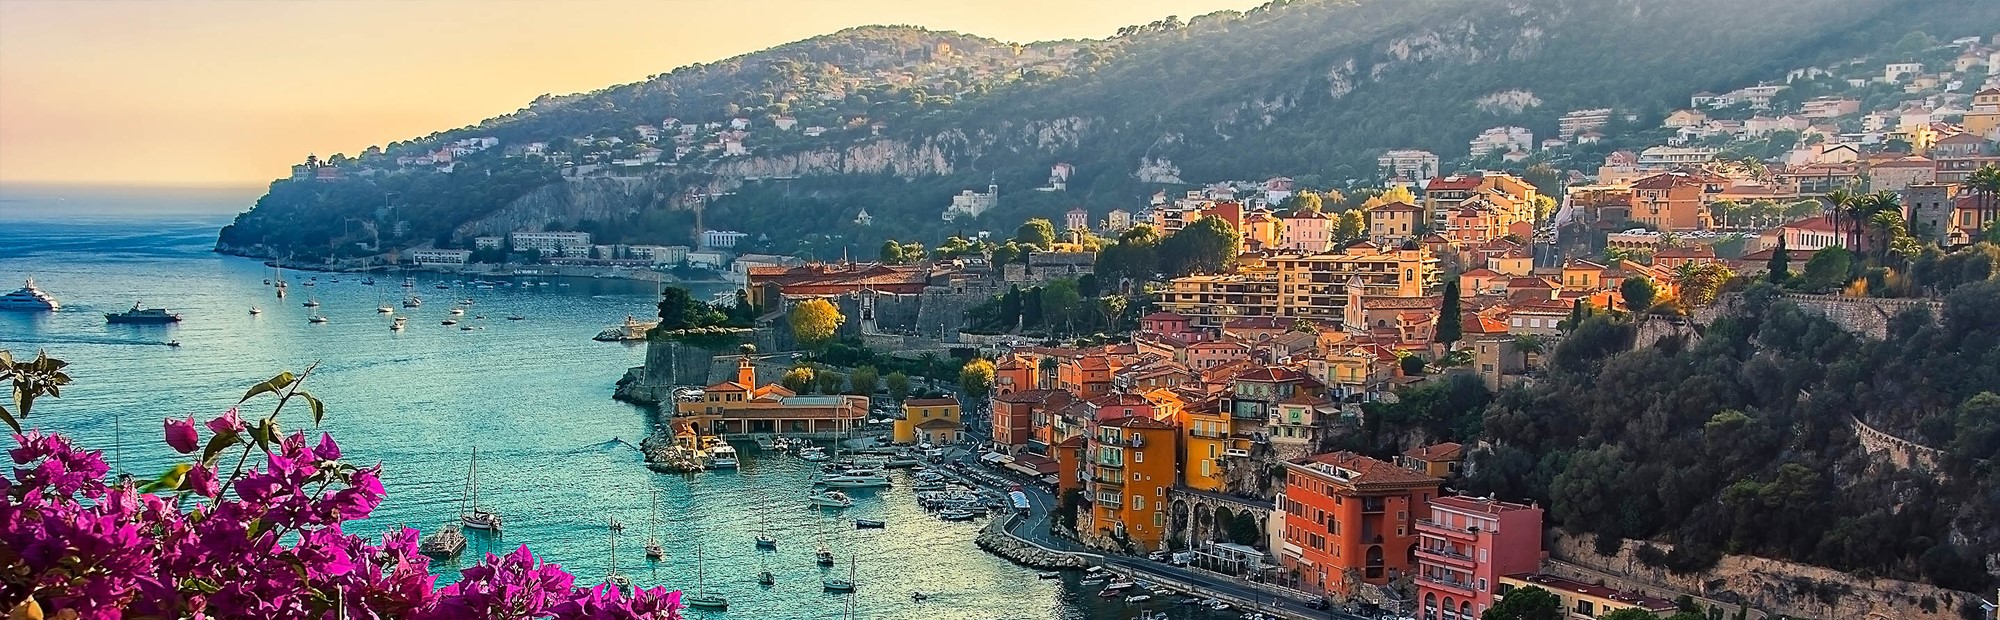 A classic French Riviera scene along the coastline - utterly timeless and iconic and quite frankly, unbeatable.